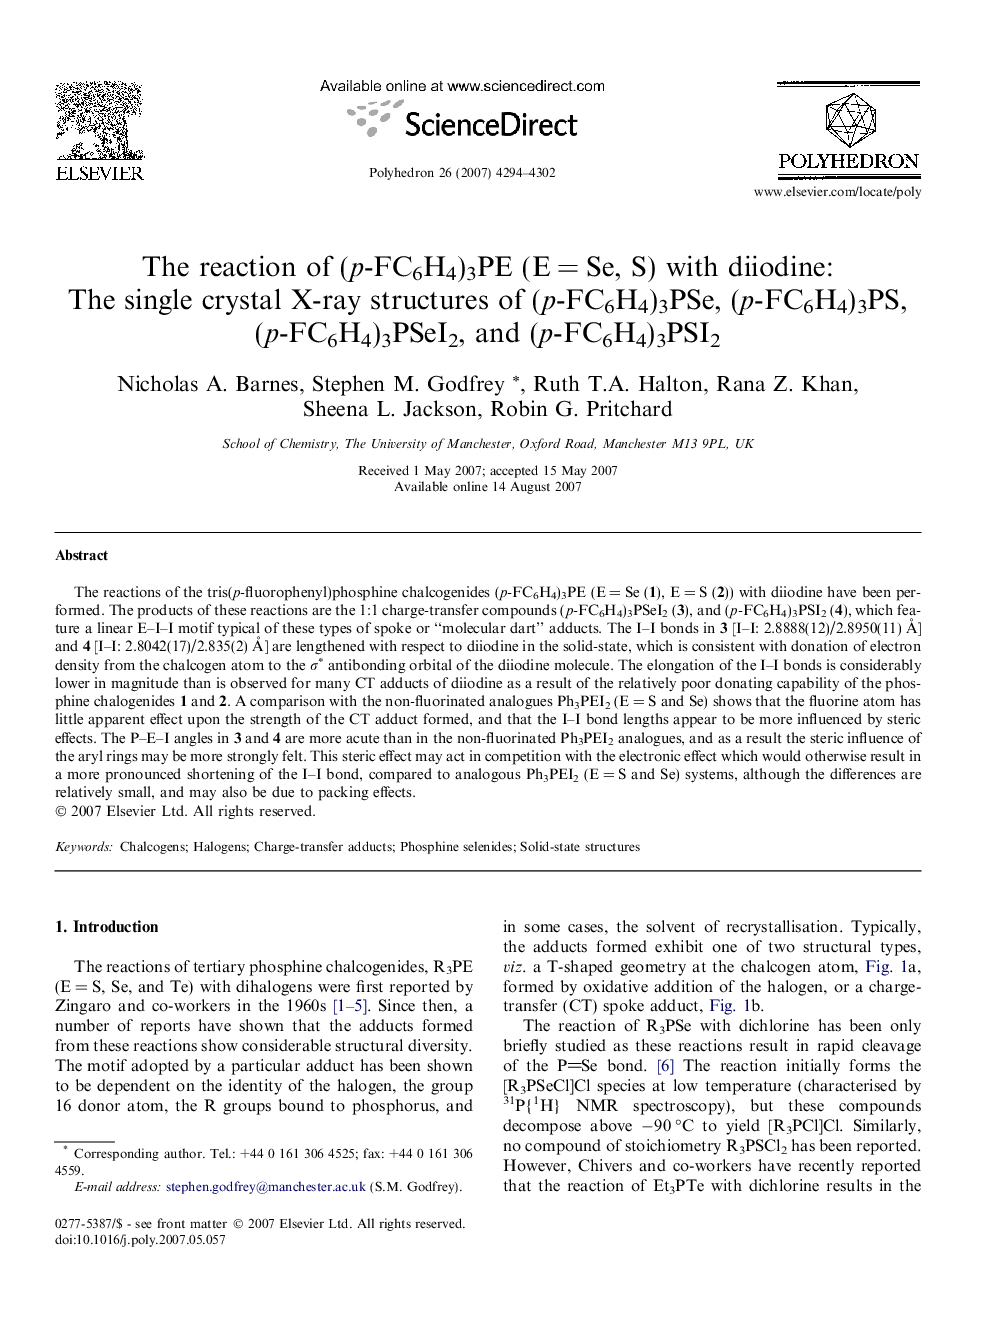 The reaction of (p-FC6H4)3PE (E = Se, S) with diiodine: The single crystal X-ray structures of (p-FC6H4)3PSe, (p-FC6H4)3PS, (p-FC6H4)3PSeI2, and (p-FC6H4)3PSI2